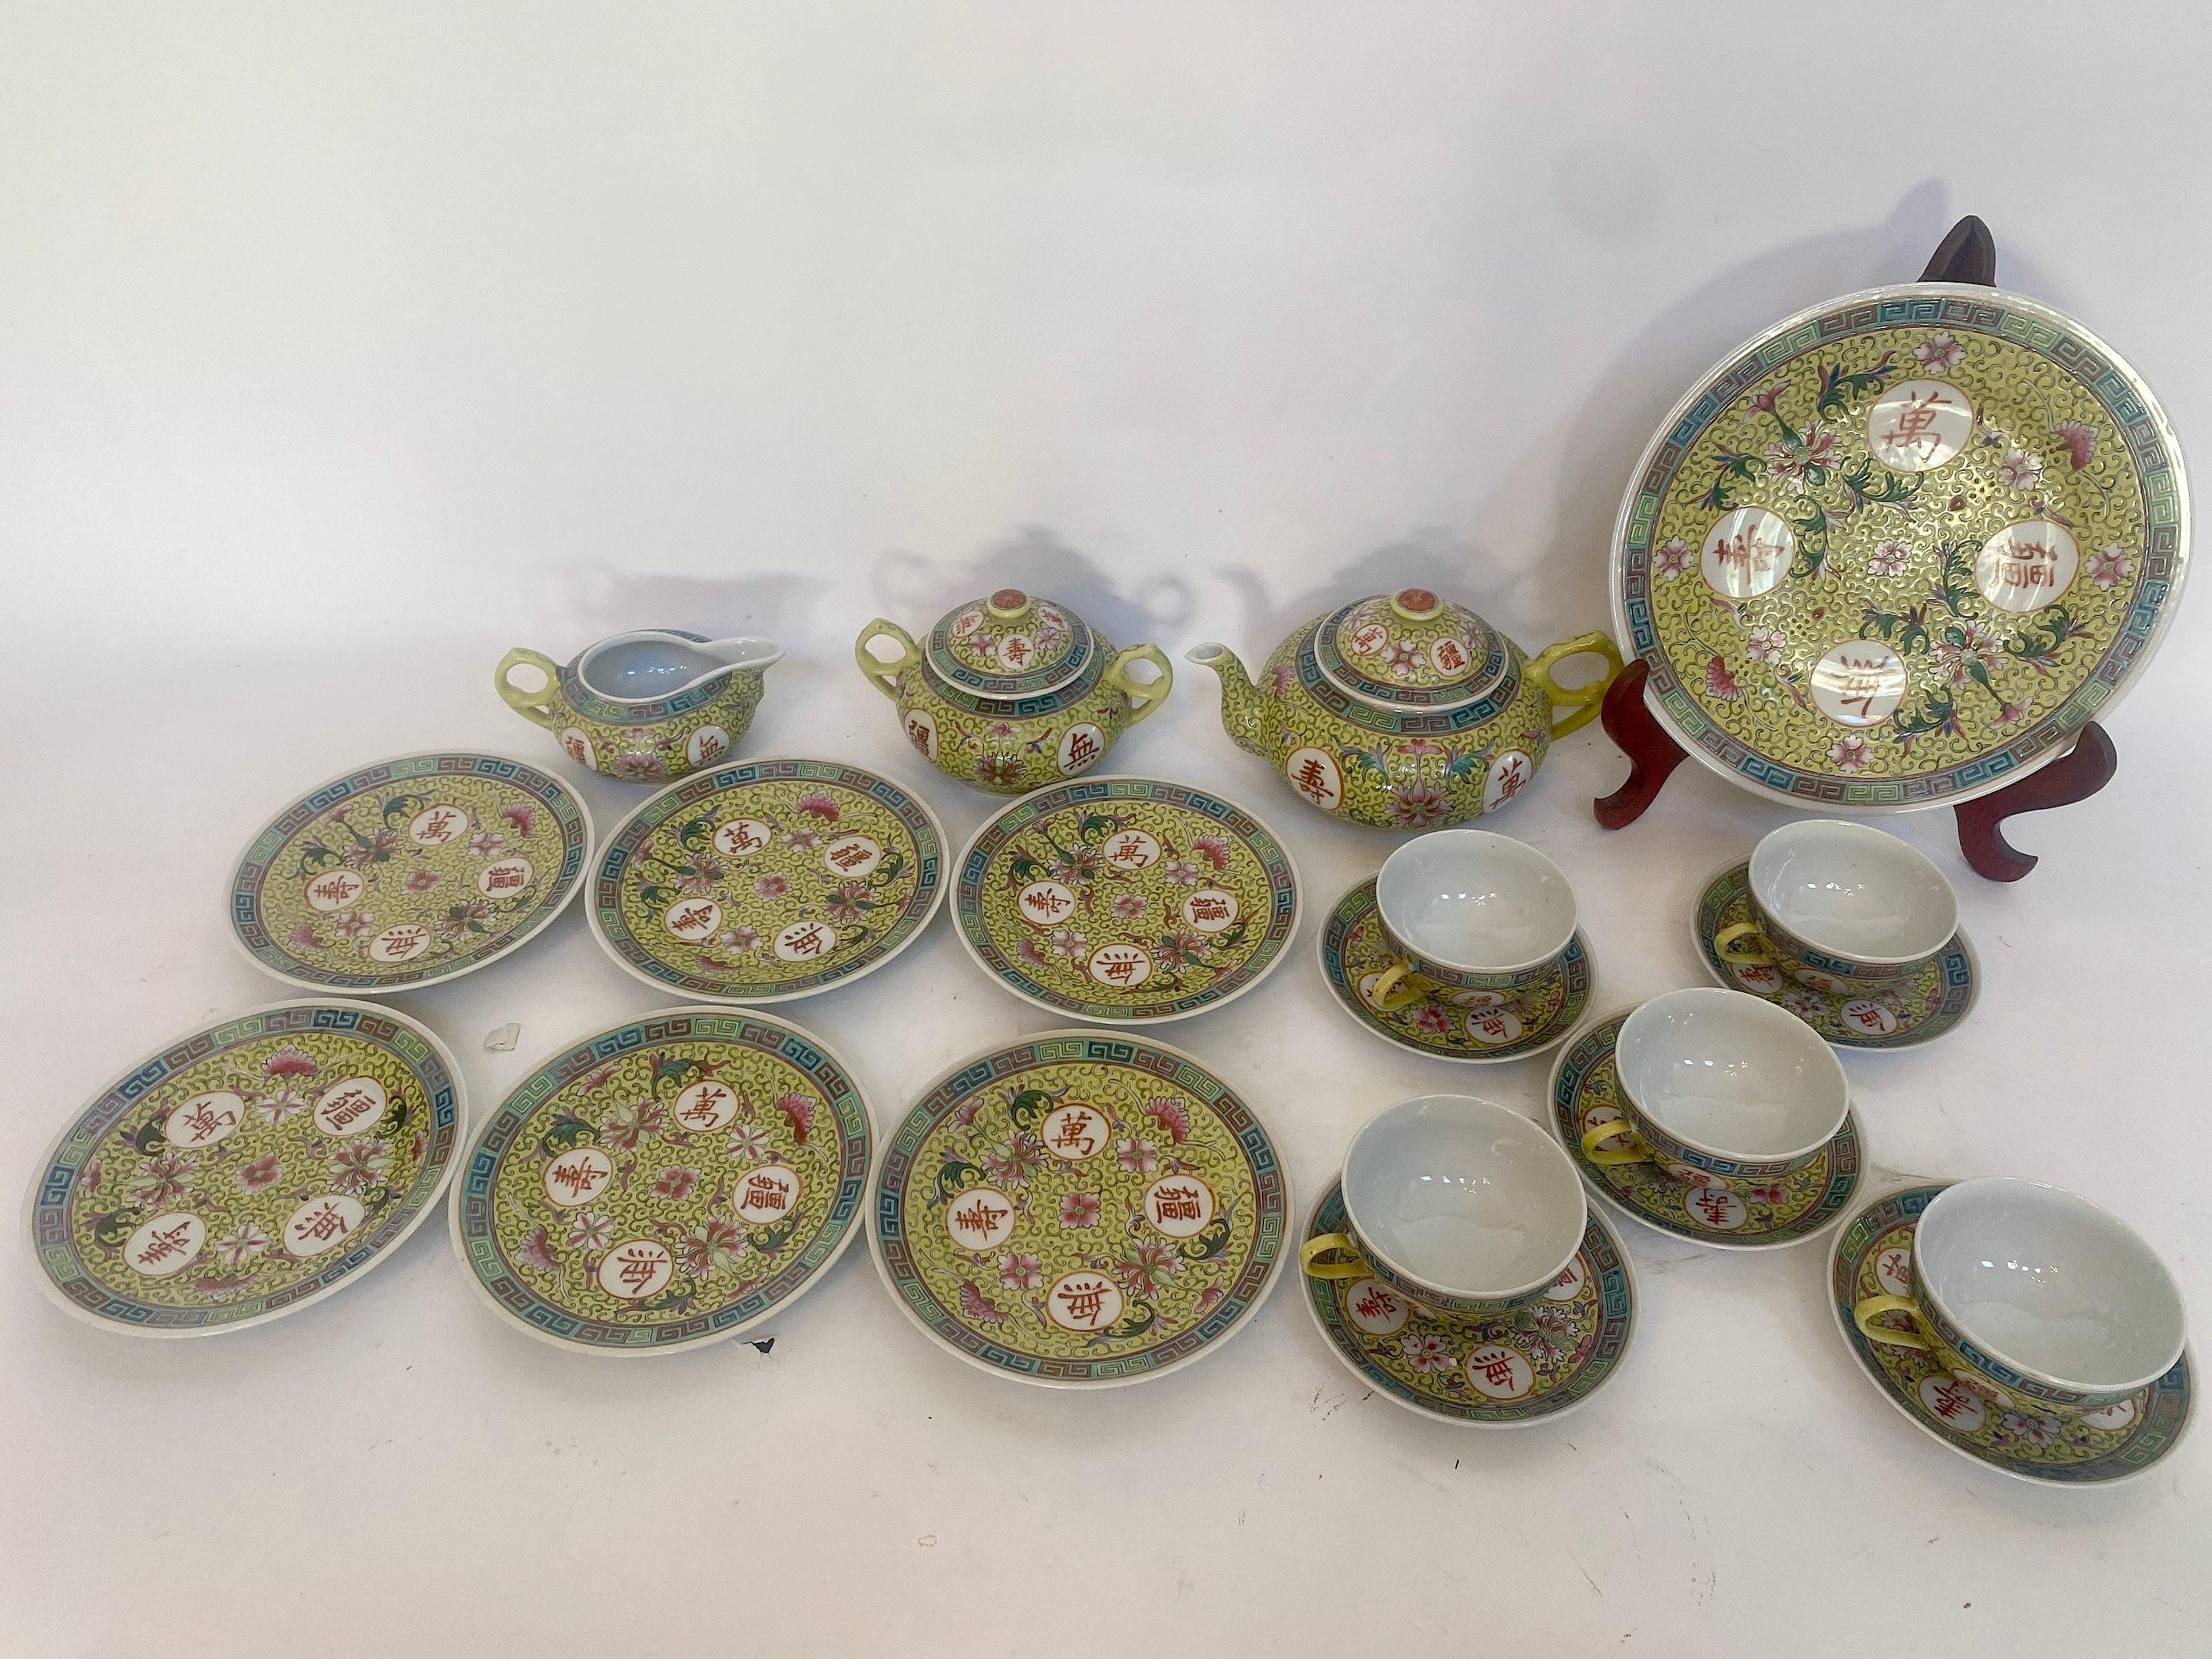 20 Pieces vintage Chinese set of tea and coffee service set, WanShouWuJiang yellow ground, all marked on the bottom : QIANLONGNIANZHI,
No crake, one plate has chip on the edge,
One teapot and cover , 6'' x 5.5'' , longest 9''
One one sugar bowl